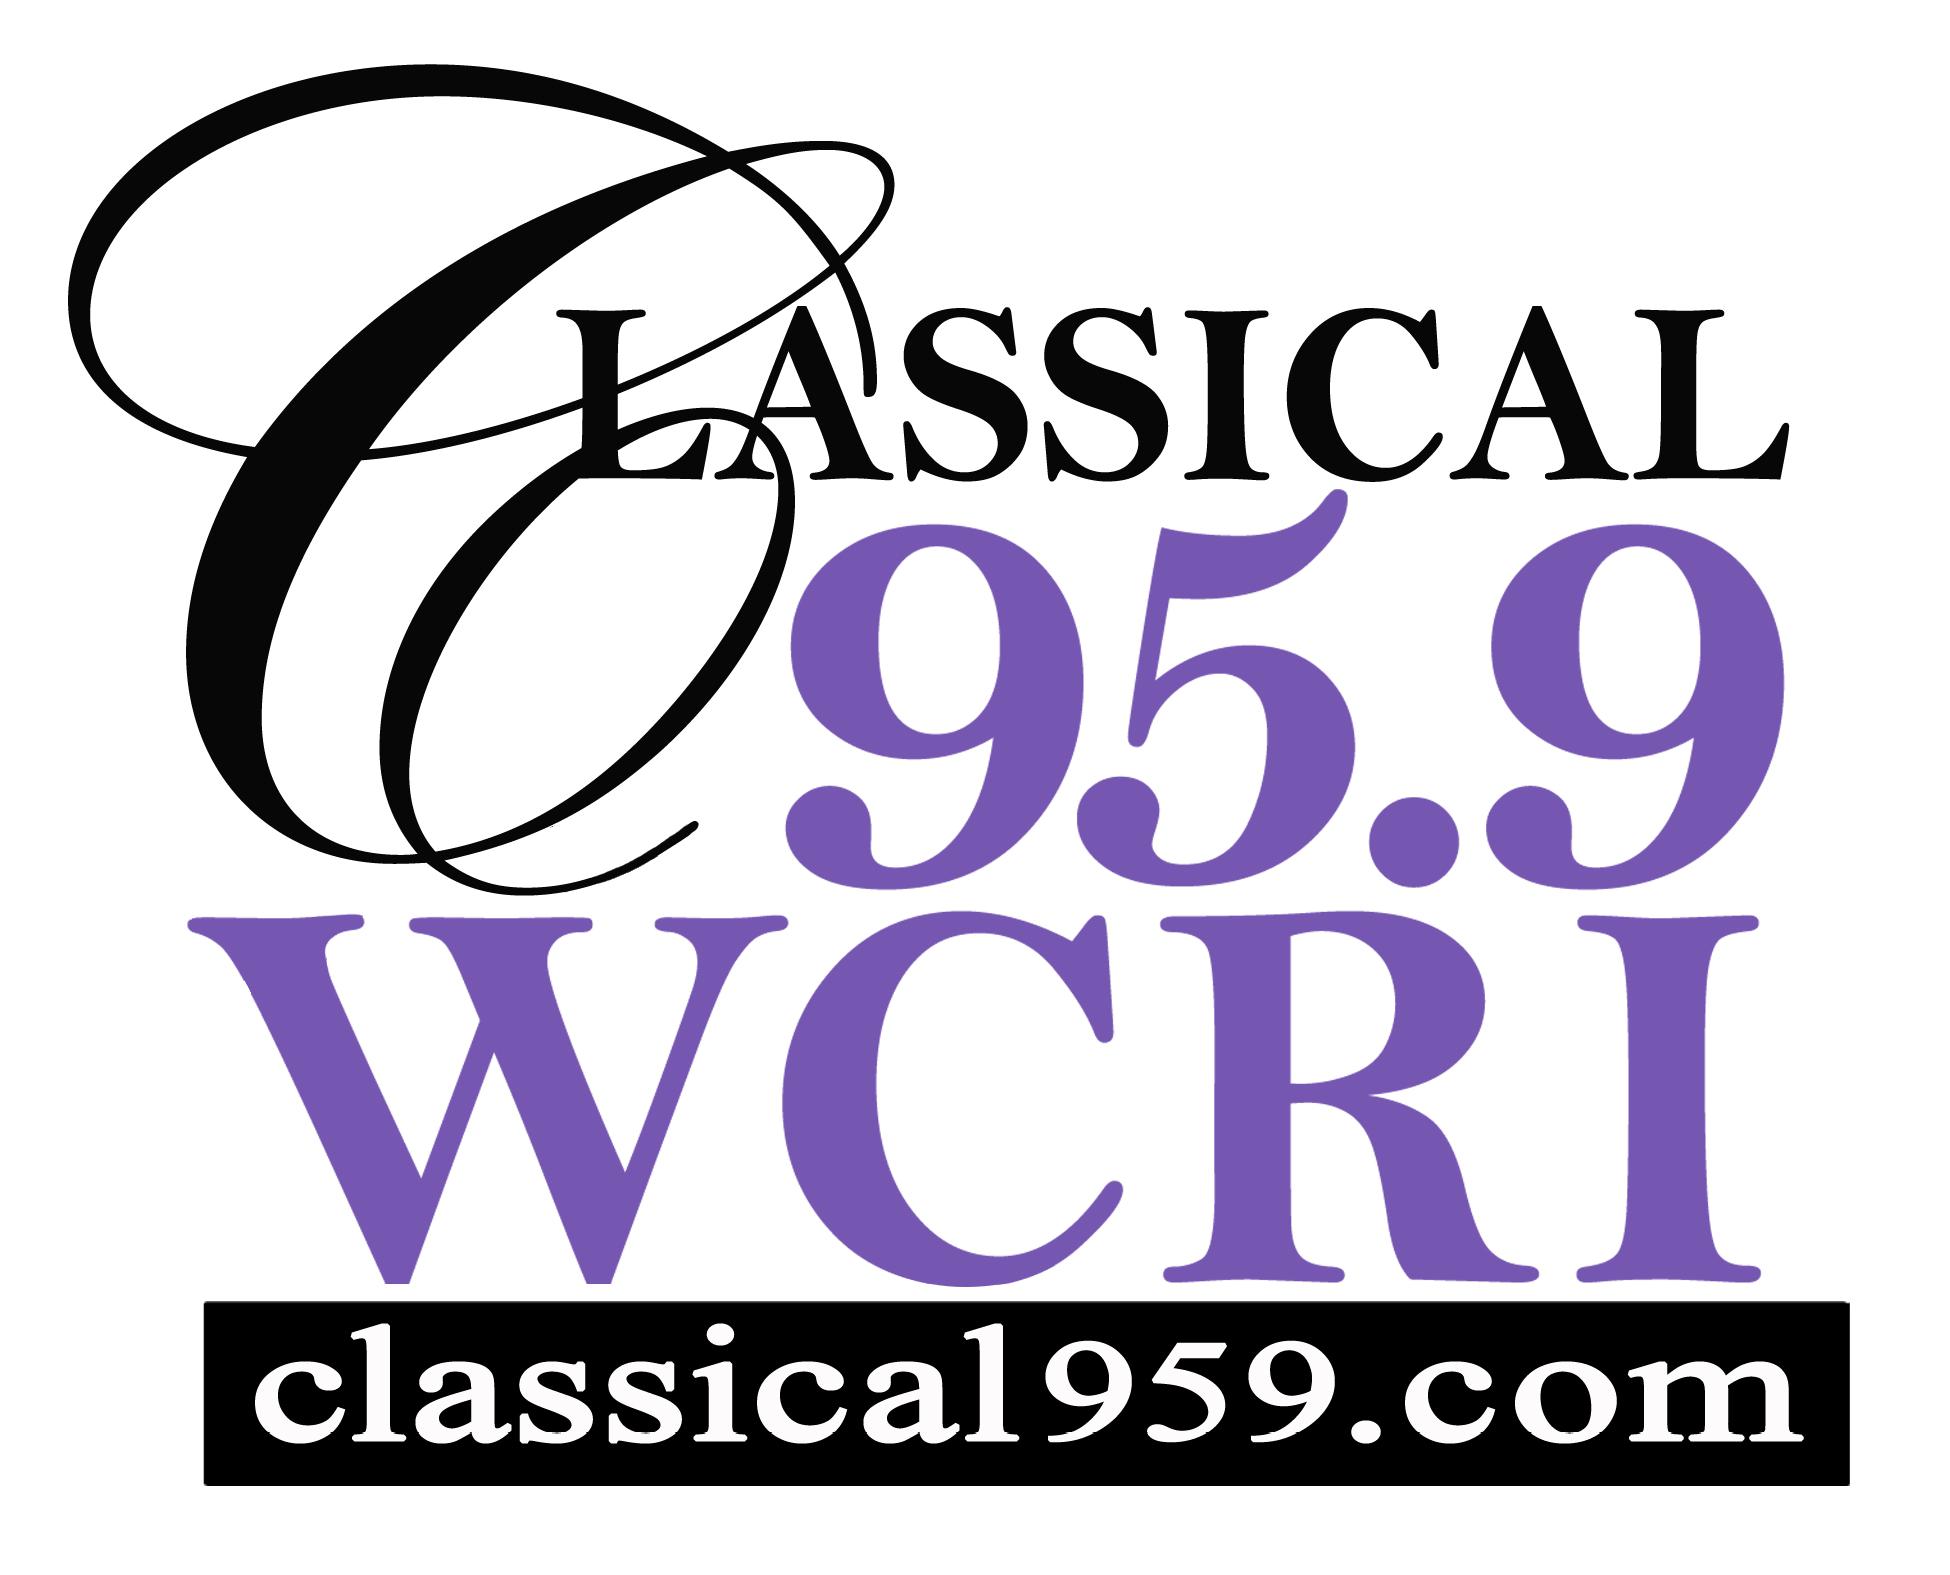 07-17-15   Choral Director Pierre Masse - WCRI's Festival Series featuring the Newport Music Festival